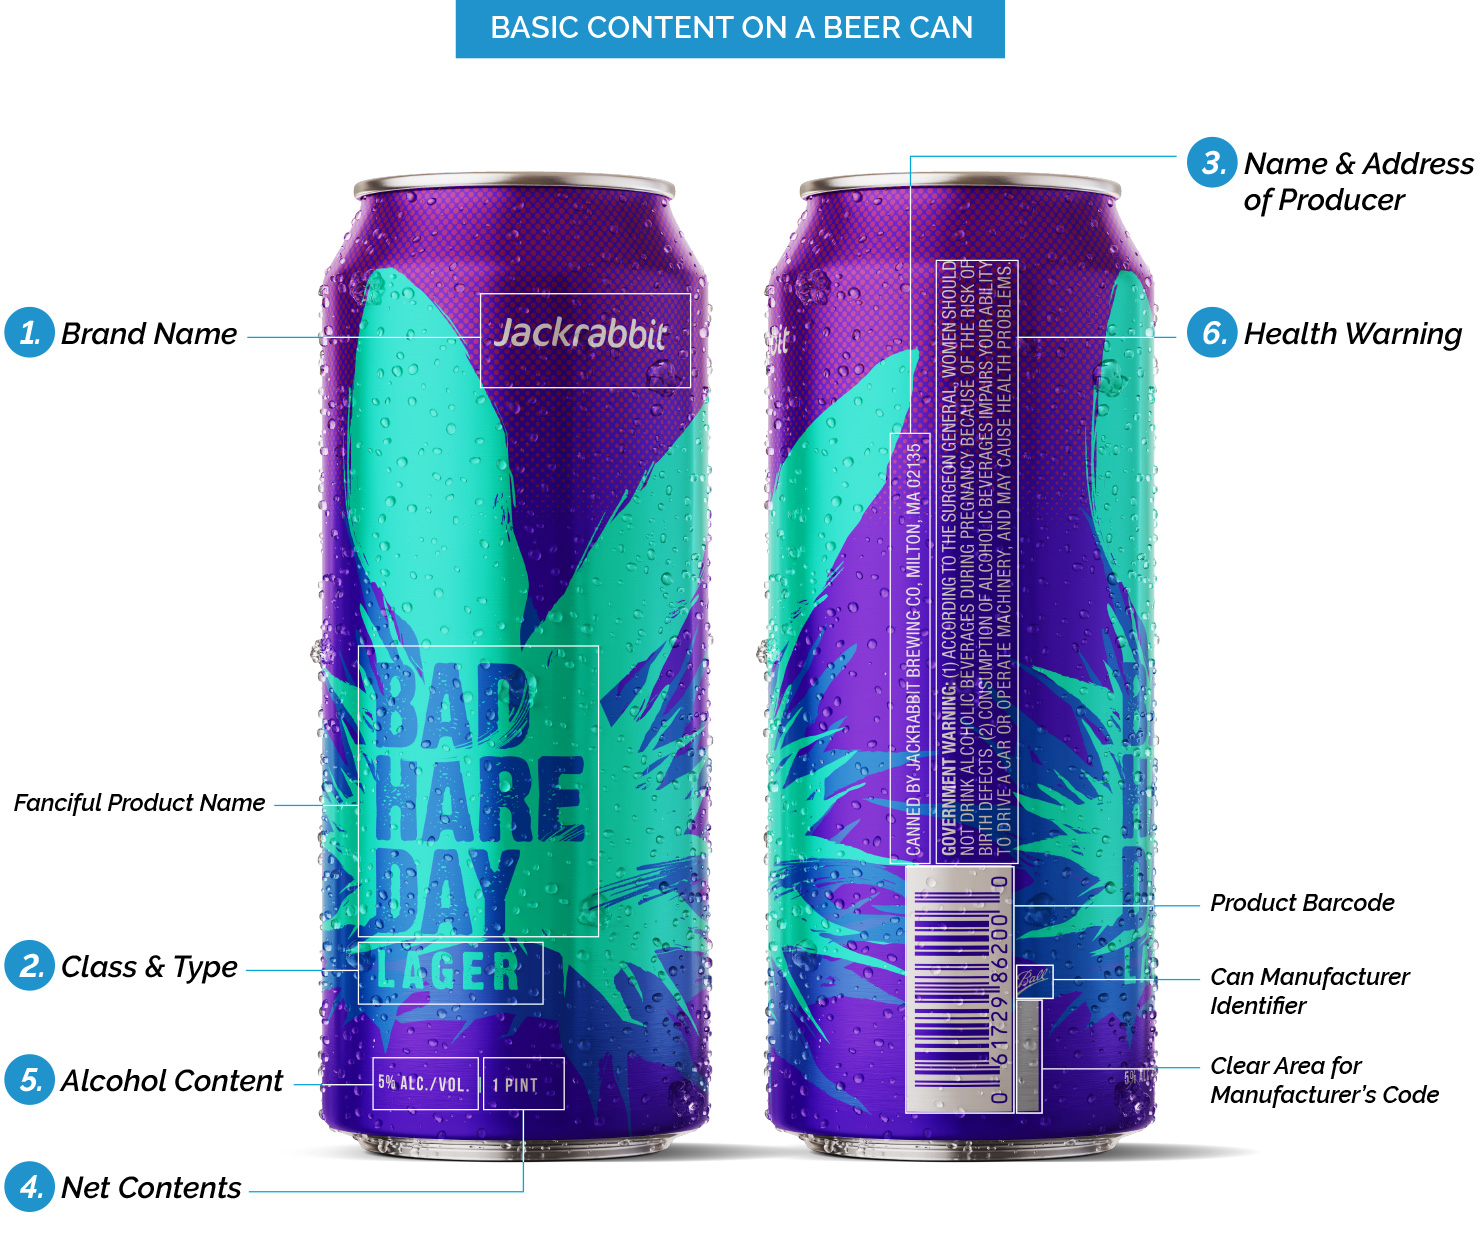 Design Guide to Beer Label Requirements: Diagram showing the Basic Content on a Beer Can using Bad Hard Day Lager, designed by Jackrabbit, as example